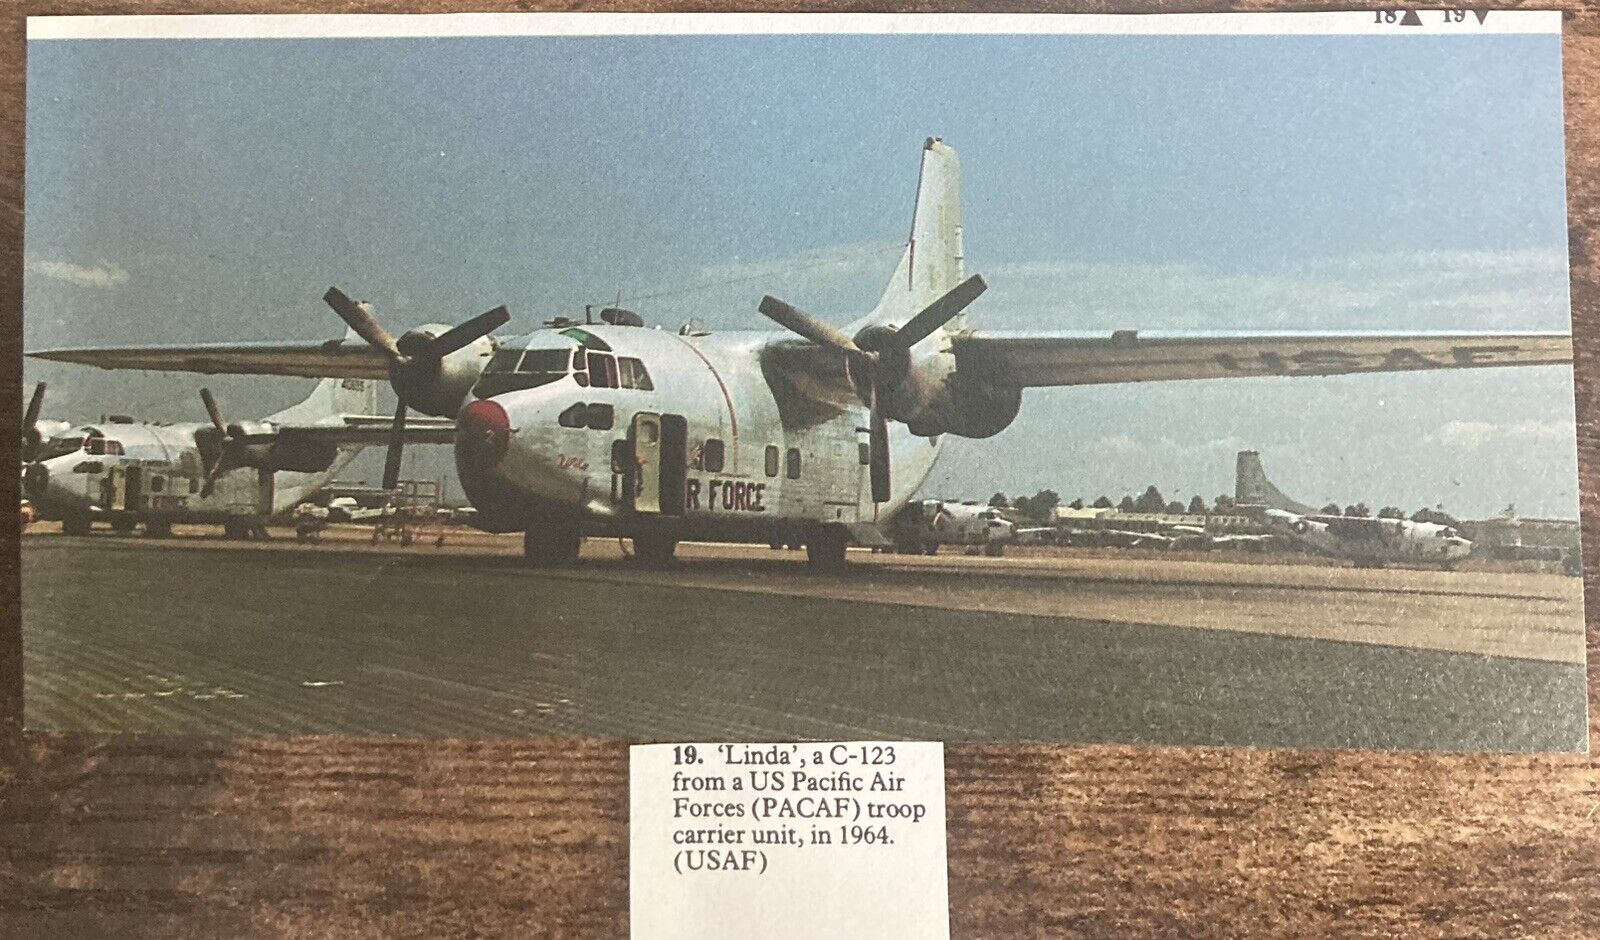 Book Clipping Photo US Pacific Air Forces C-123 “Linda” 1964 Vietnam USAF